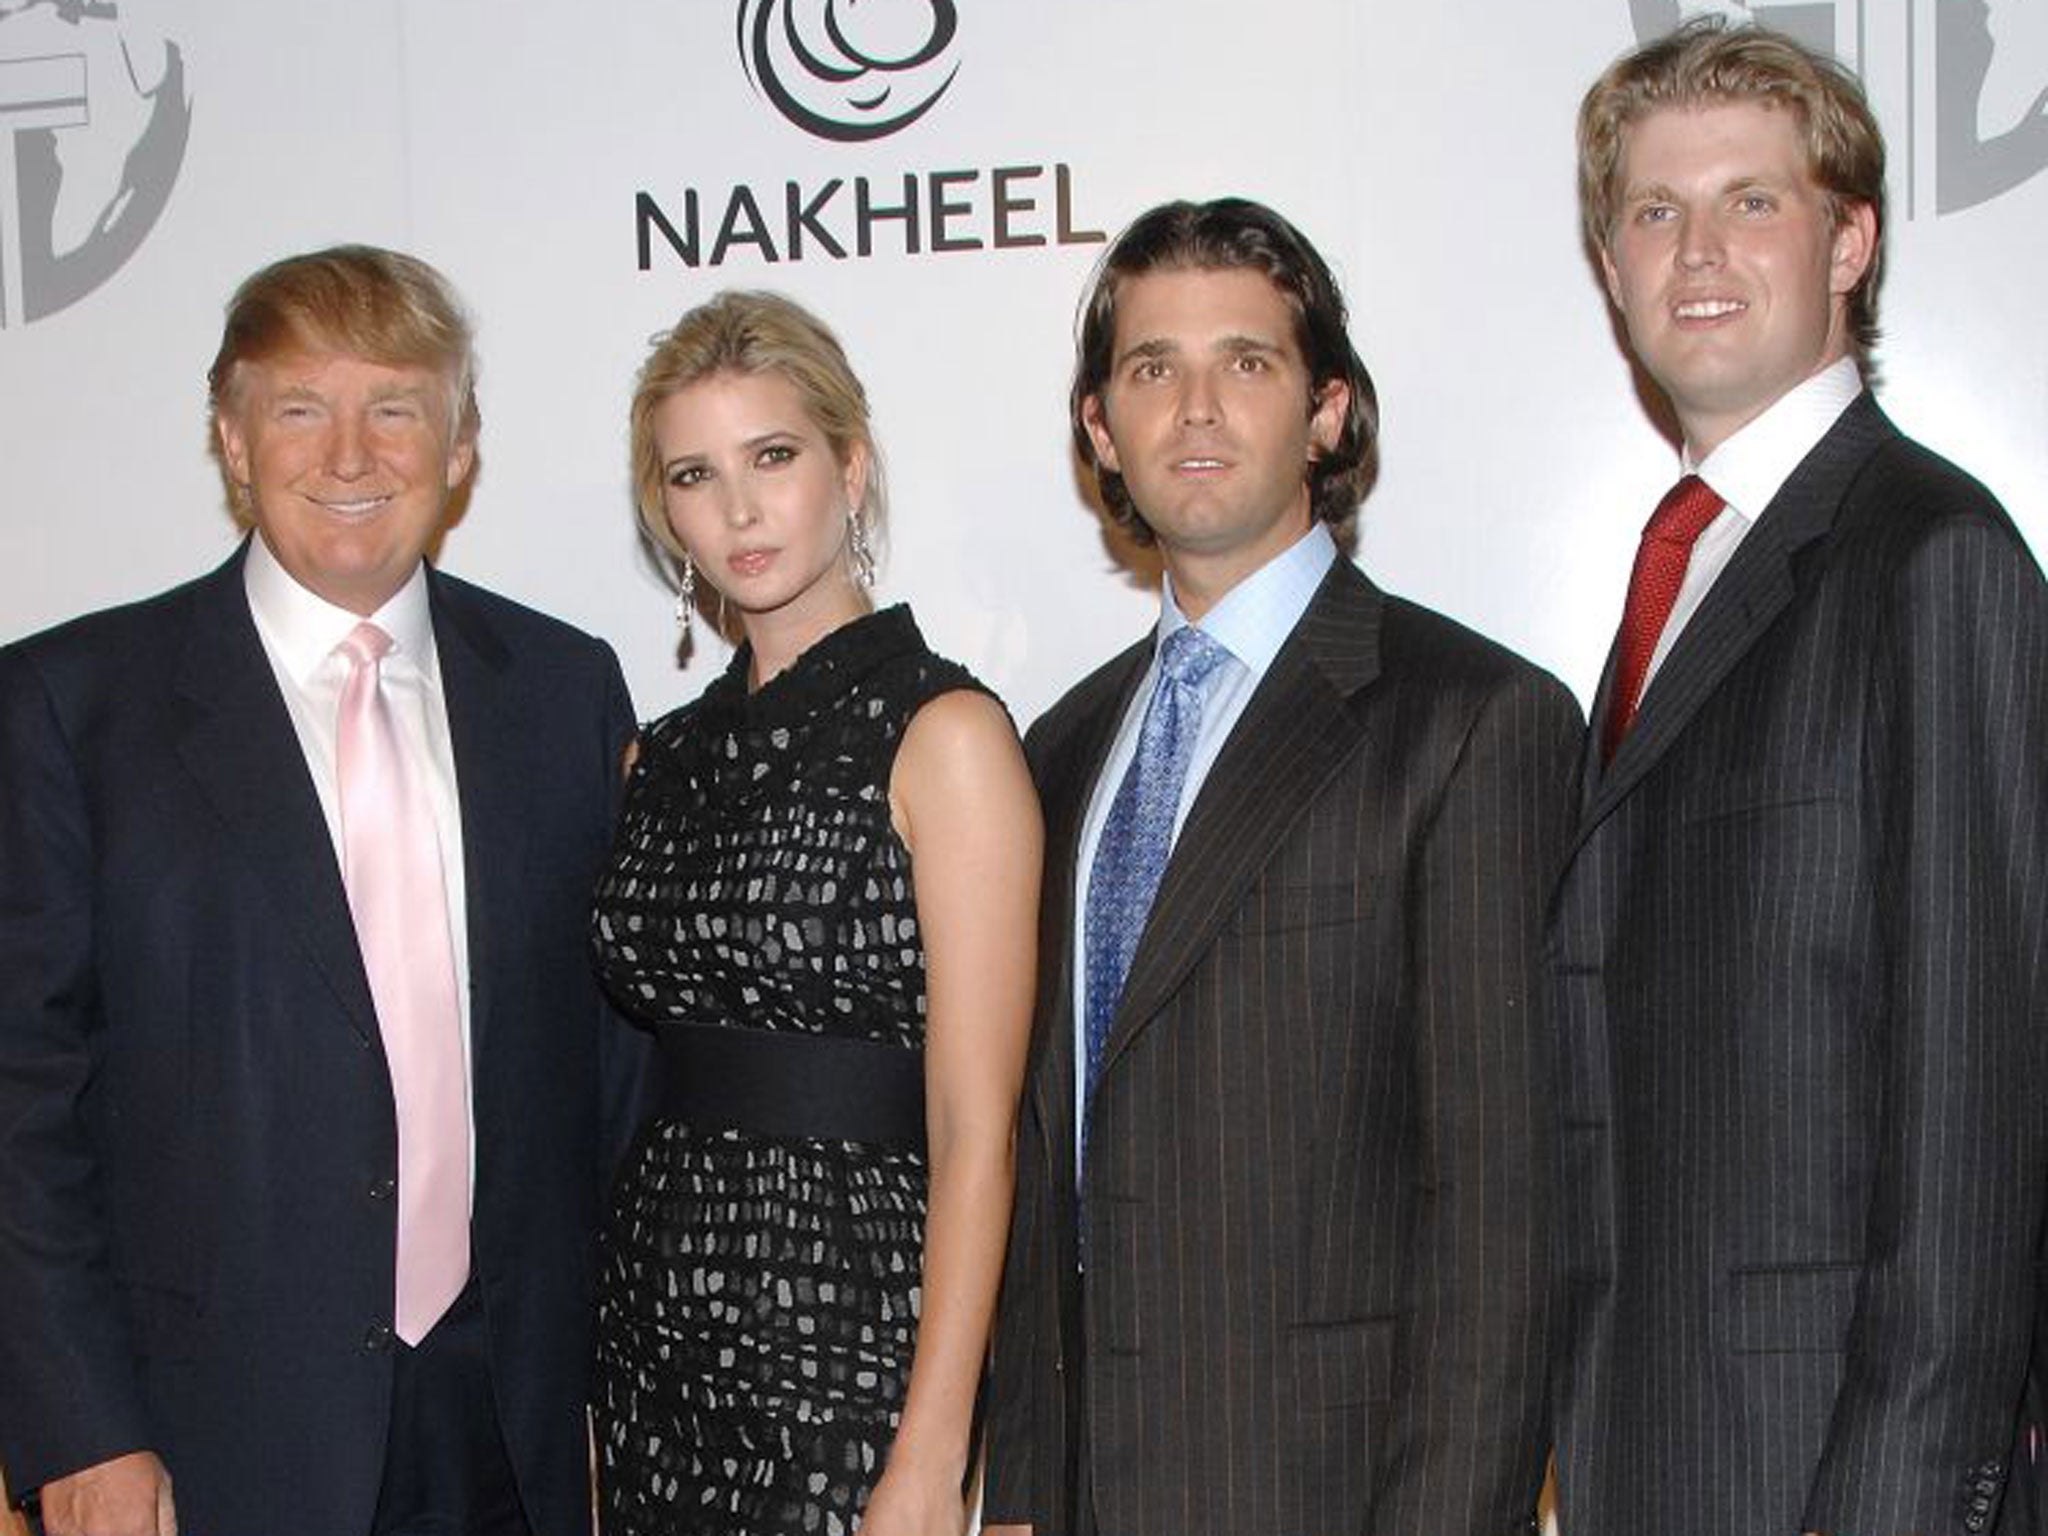 Donald Trump with his children Ivanka, Donald Jnr and Eric at one of his business launches